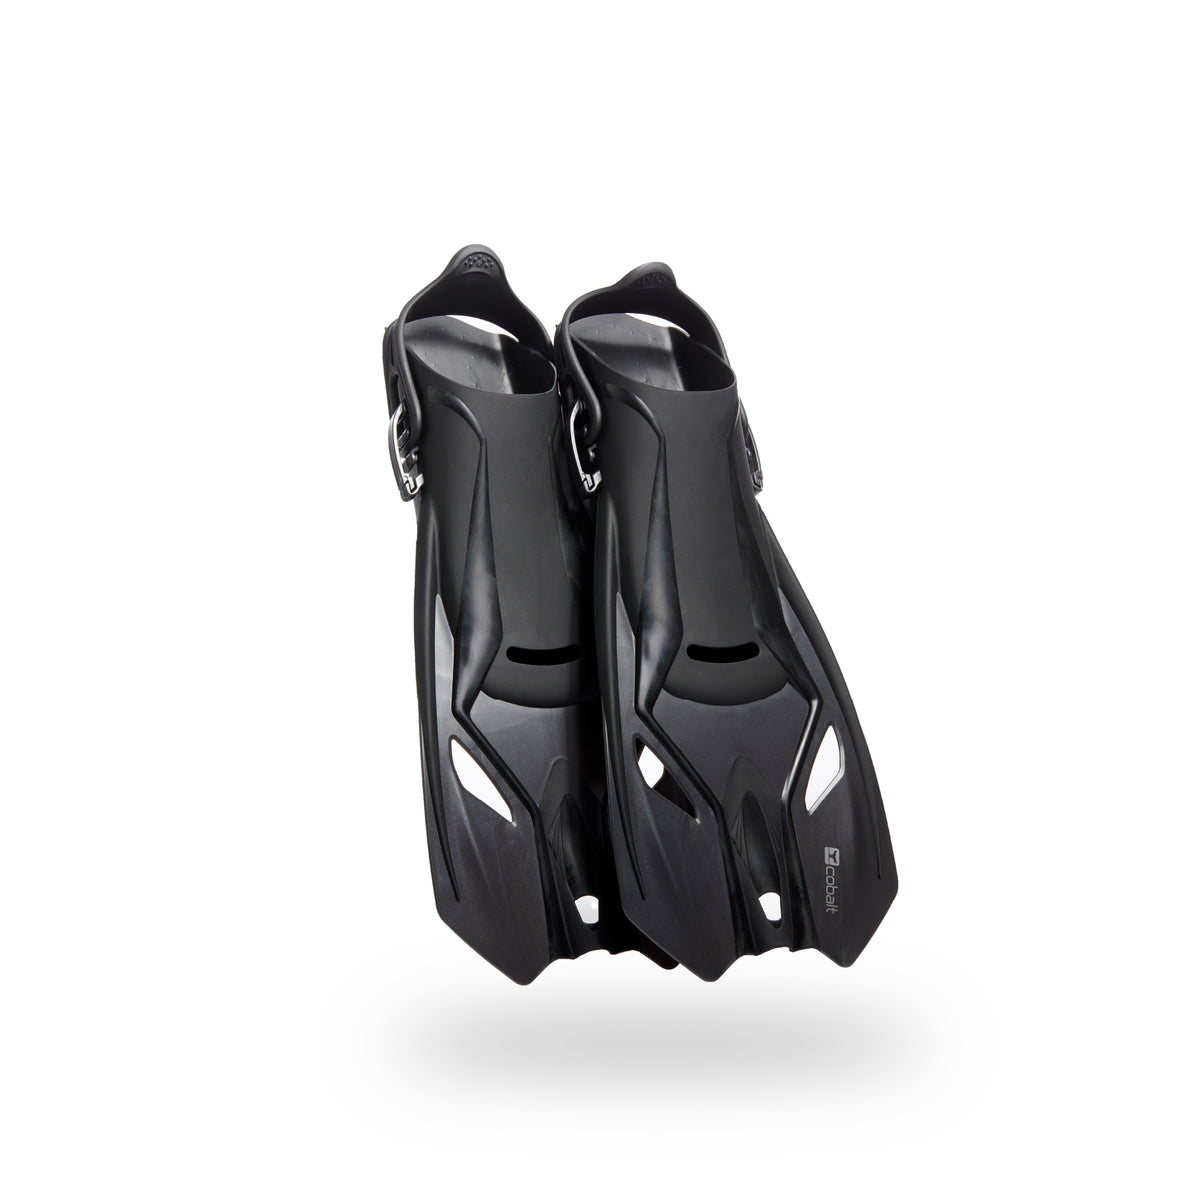 Cabo Compact Fins